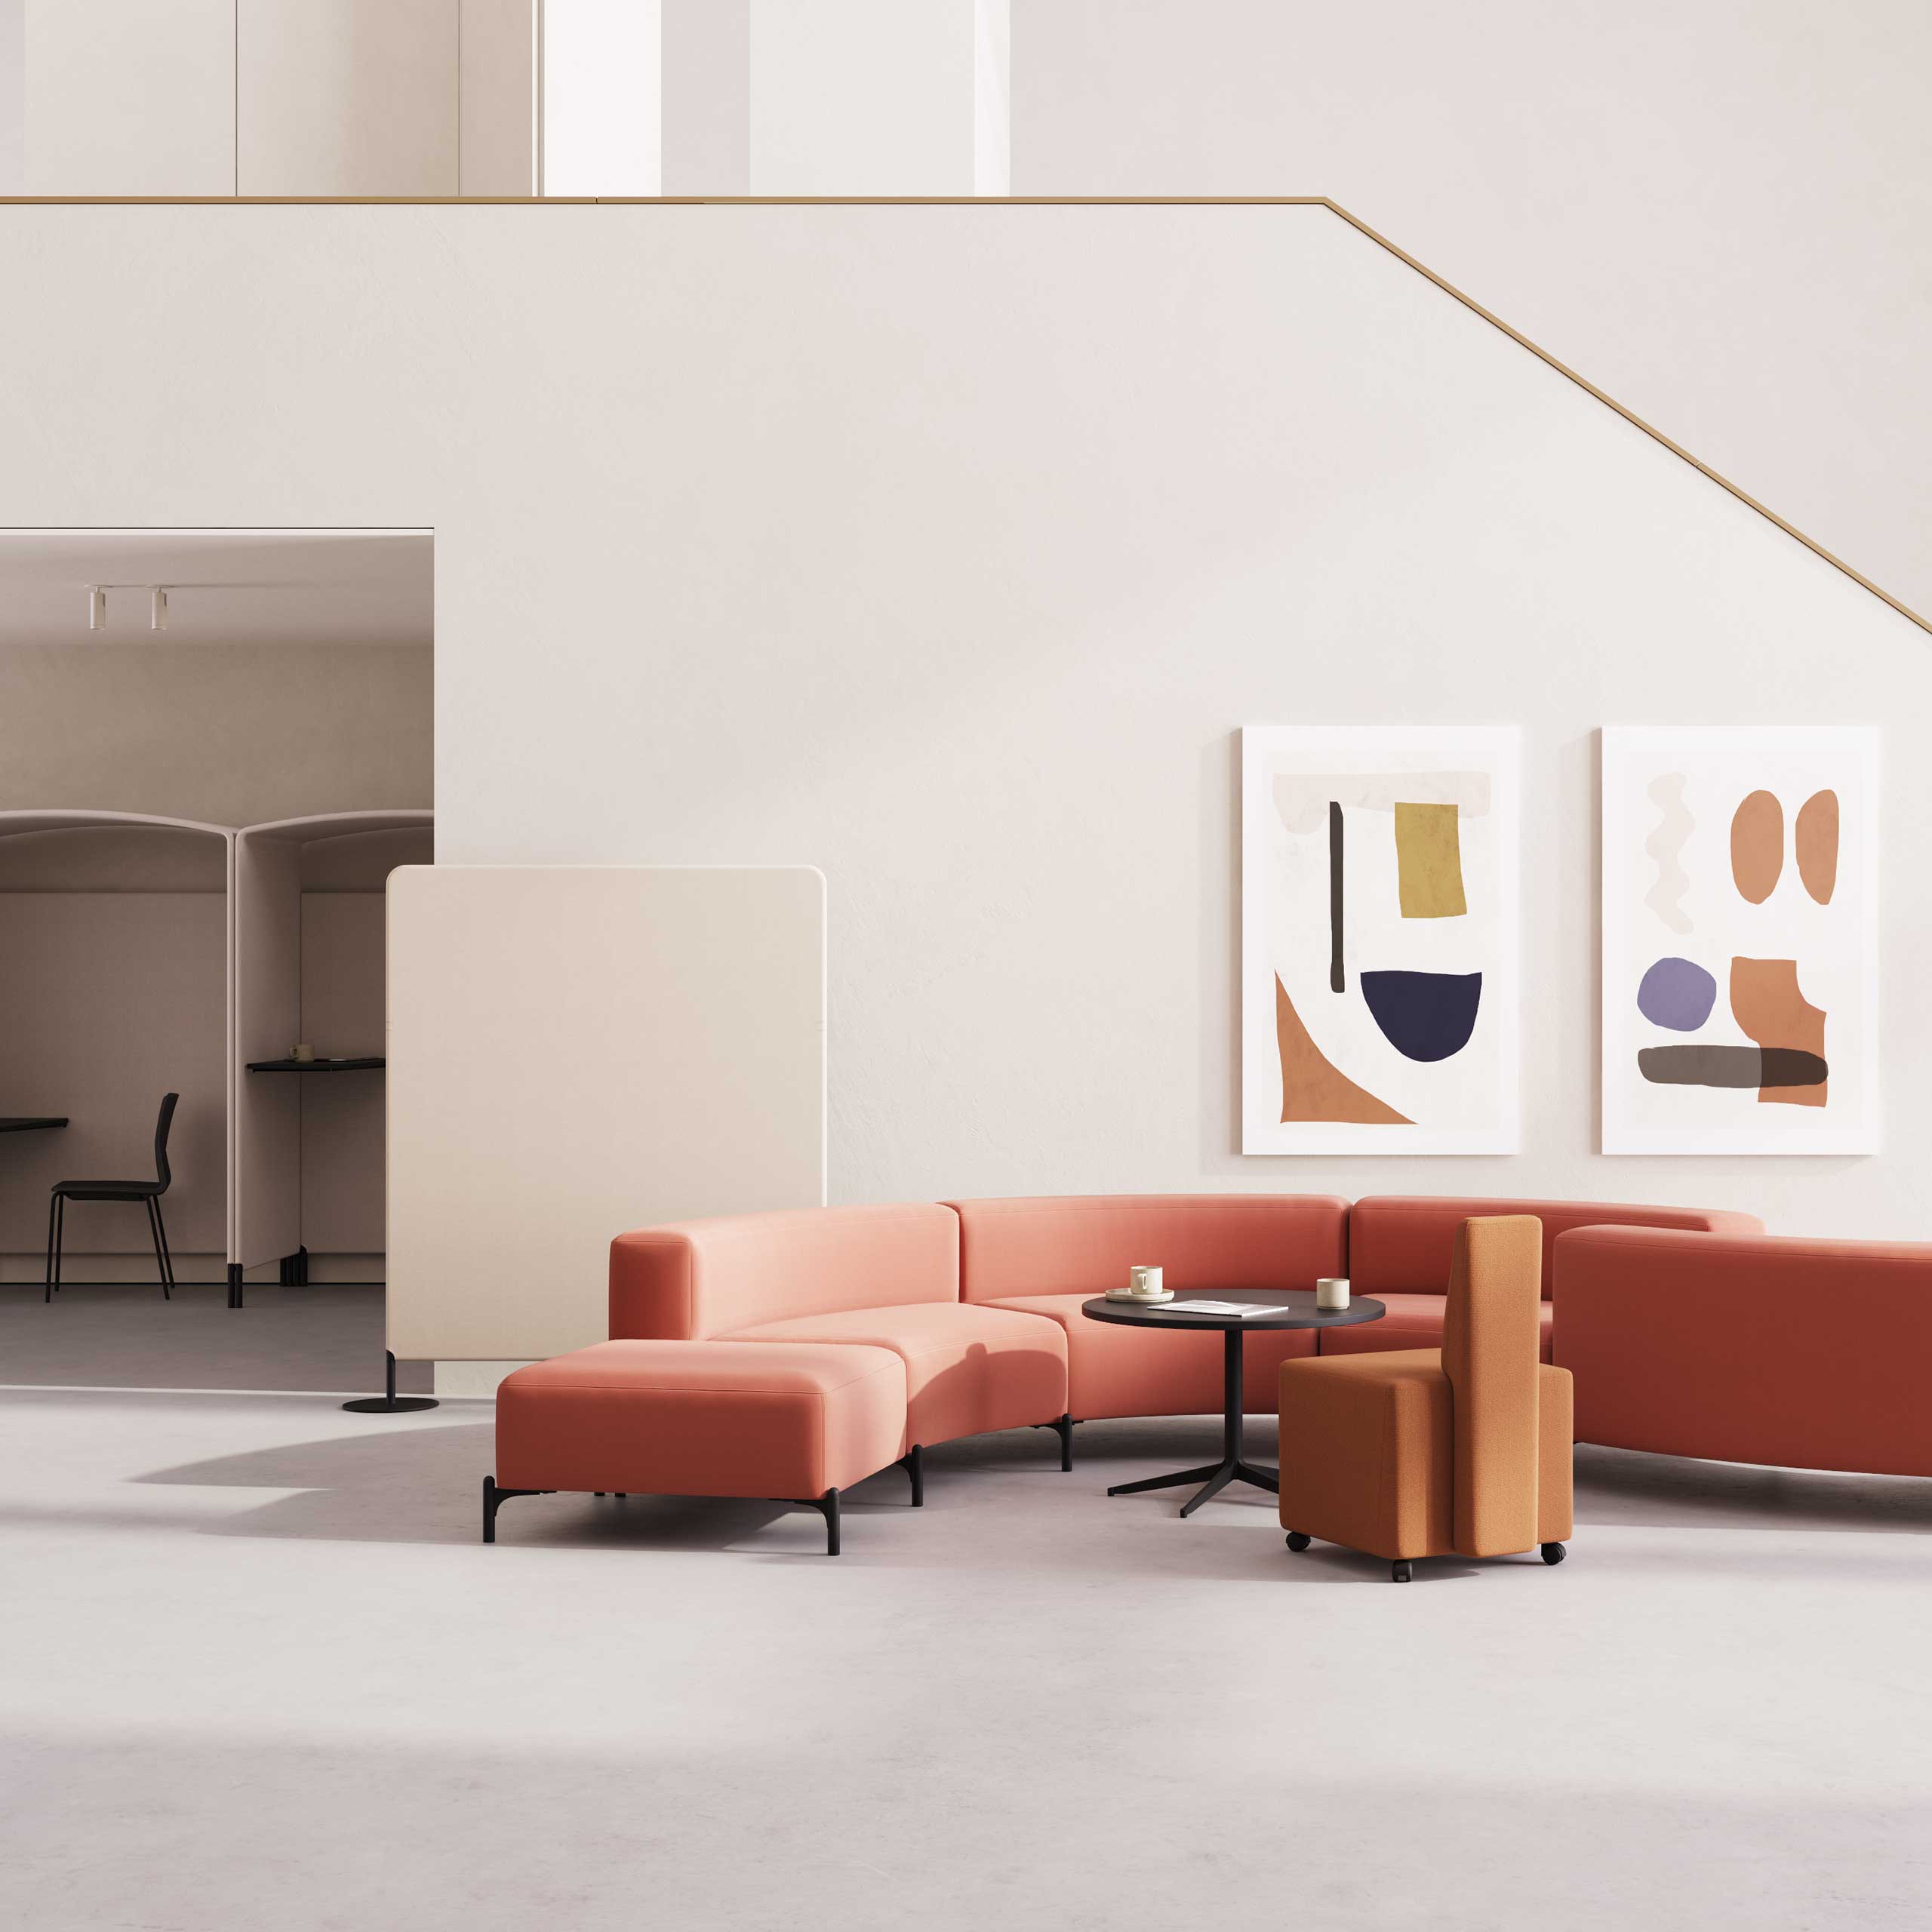 A reception area with orange office sofas and chairs.